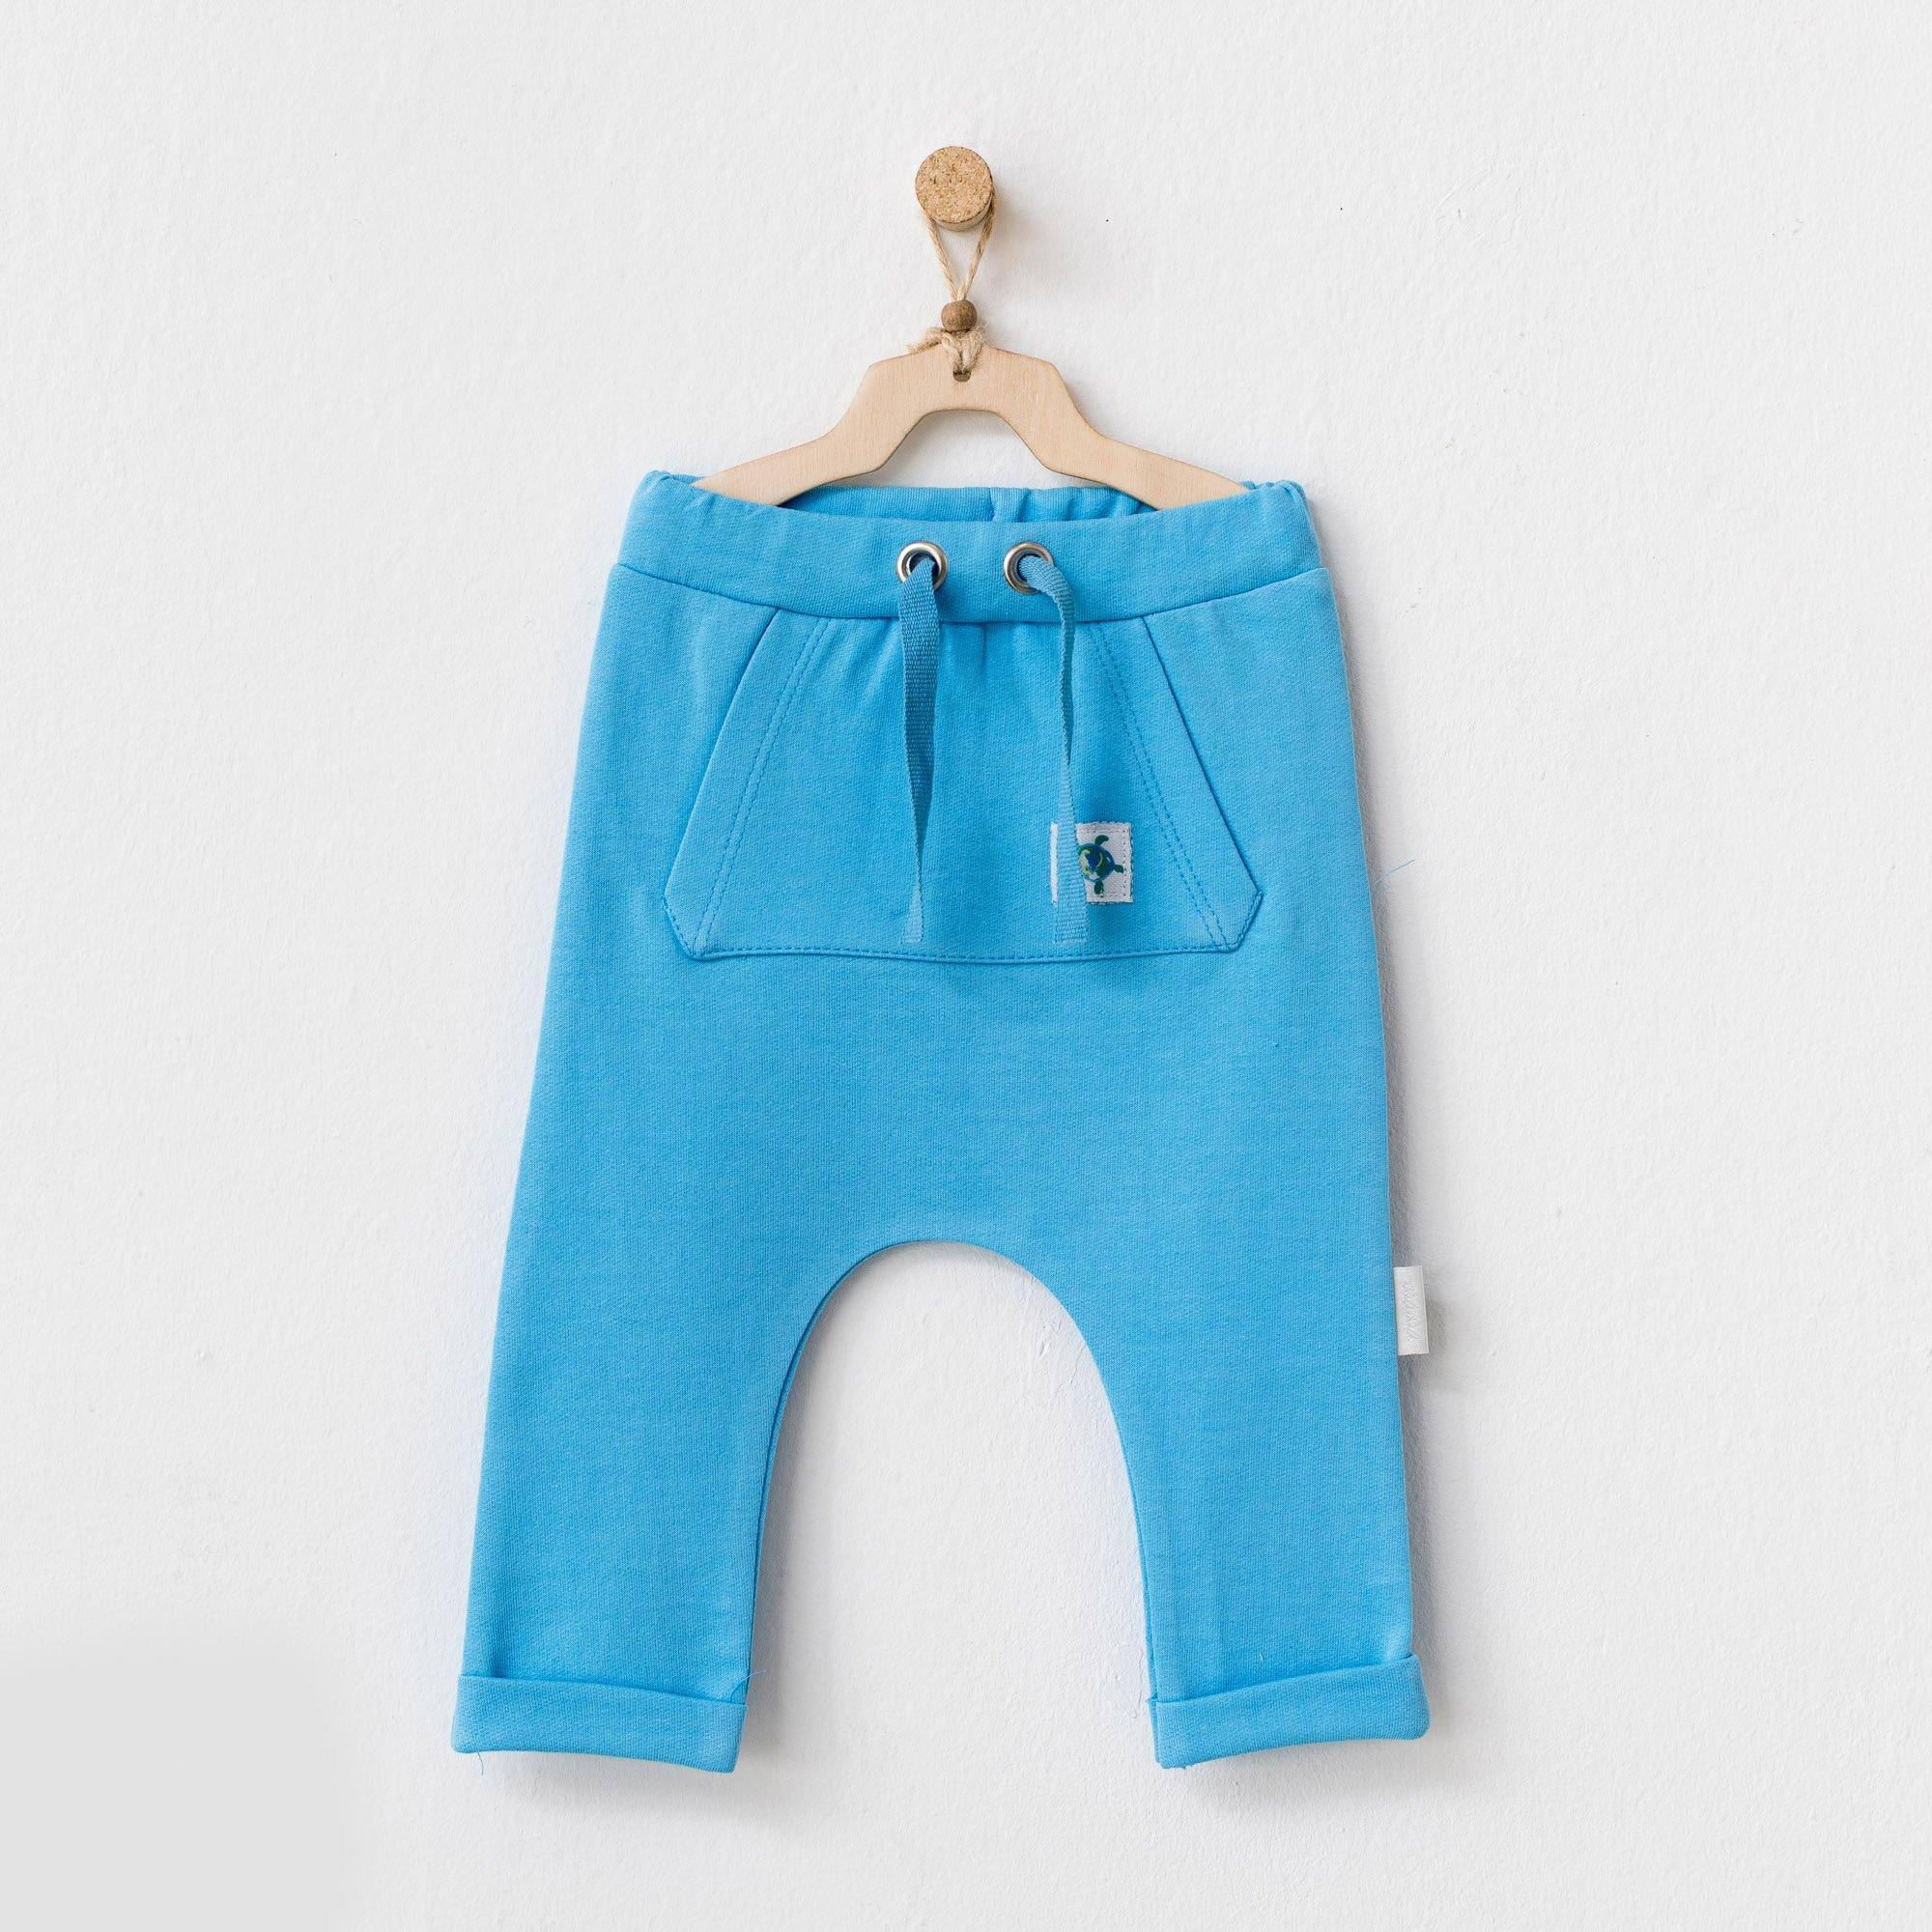 Play Time - Cotton Pant - Play Time - Cotton Pant - 1-3 Months / Navy - Andywawa - Melymod